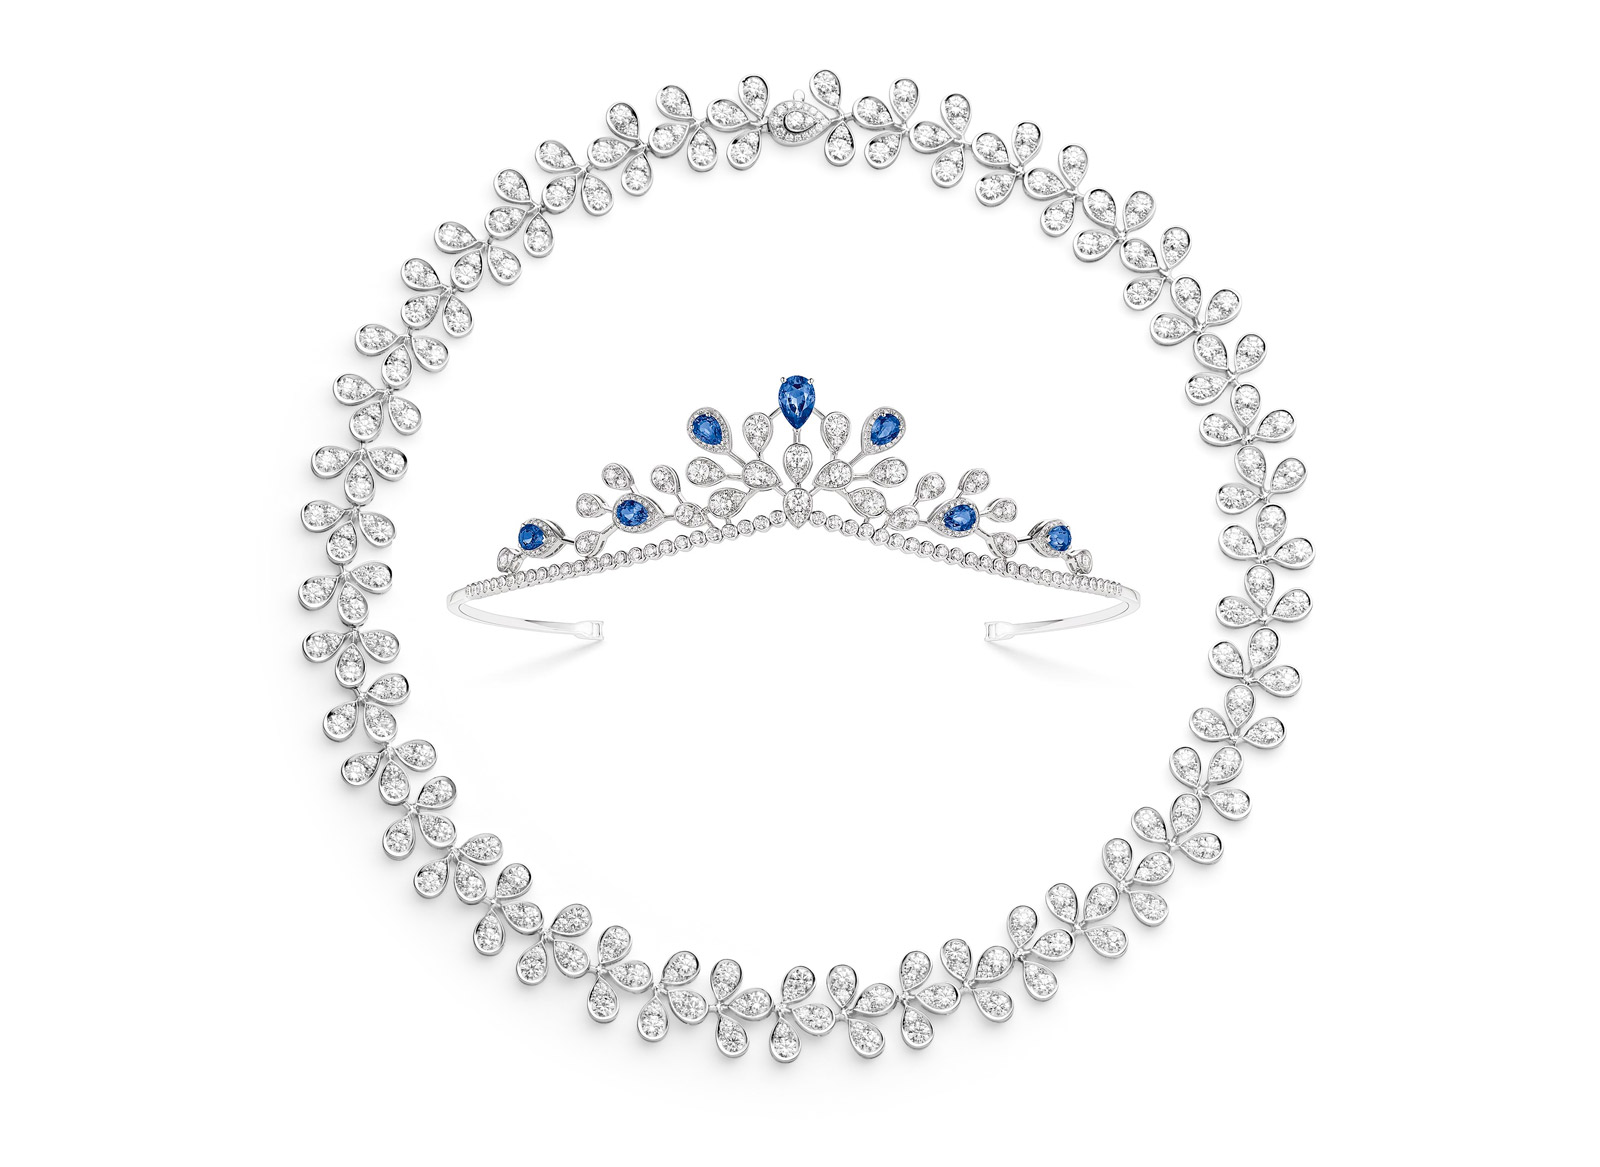 Chaumet's 'Joséphine, Joséphine – Chaumet au Firmament' necklace that converts into a headband and a tiara with sapphires and diamonds